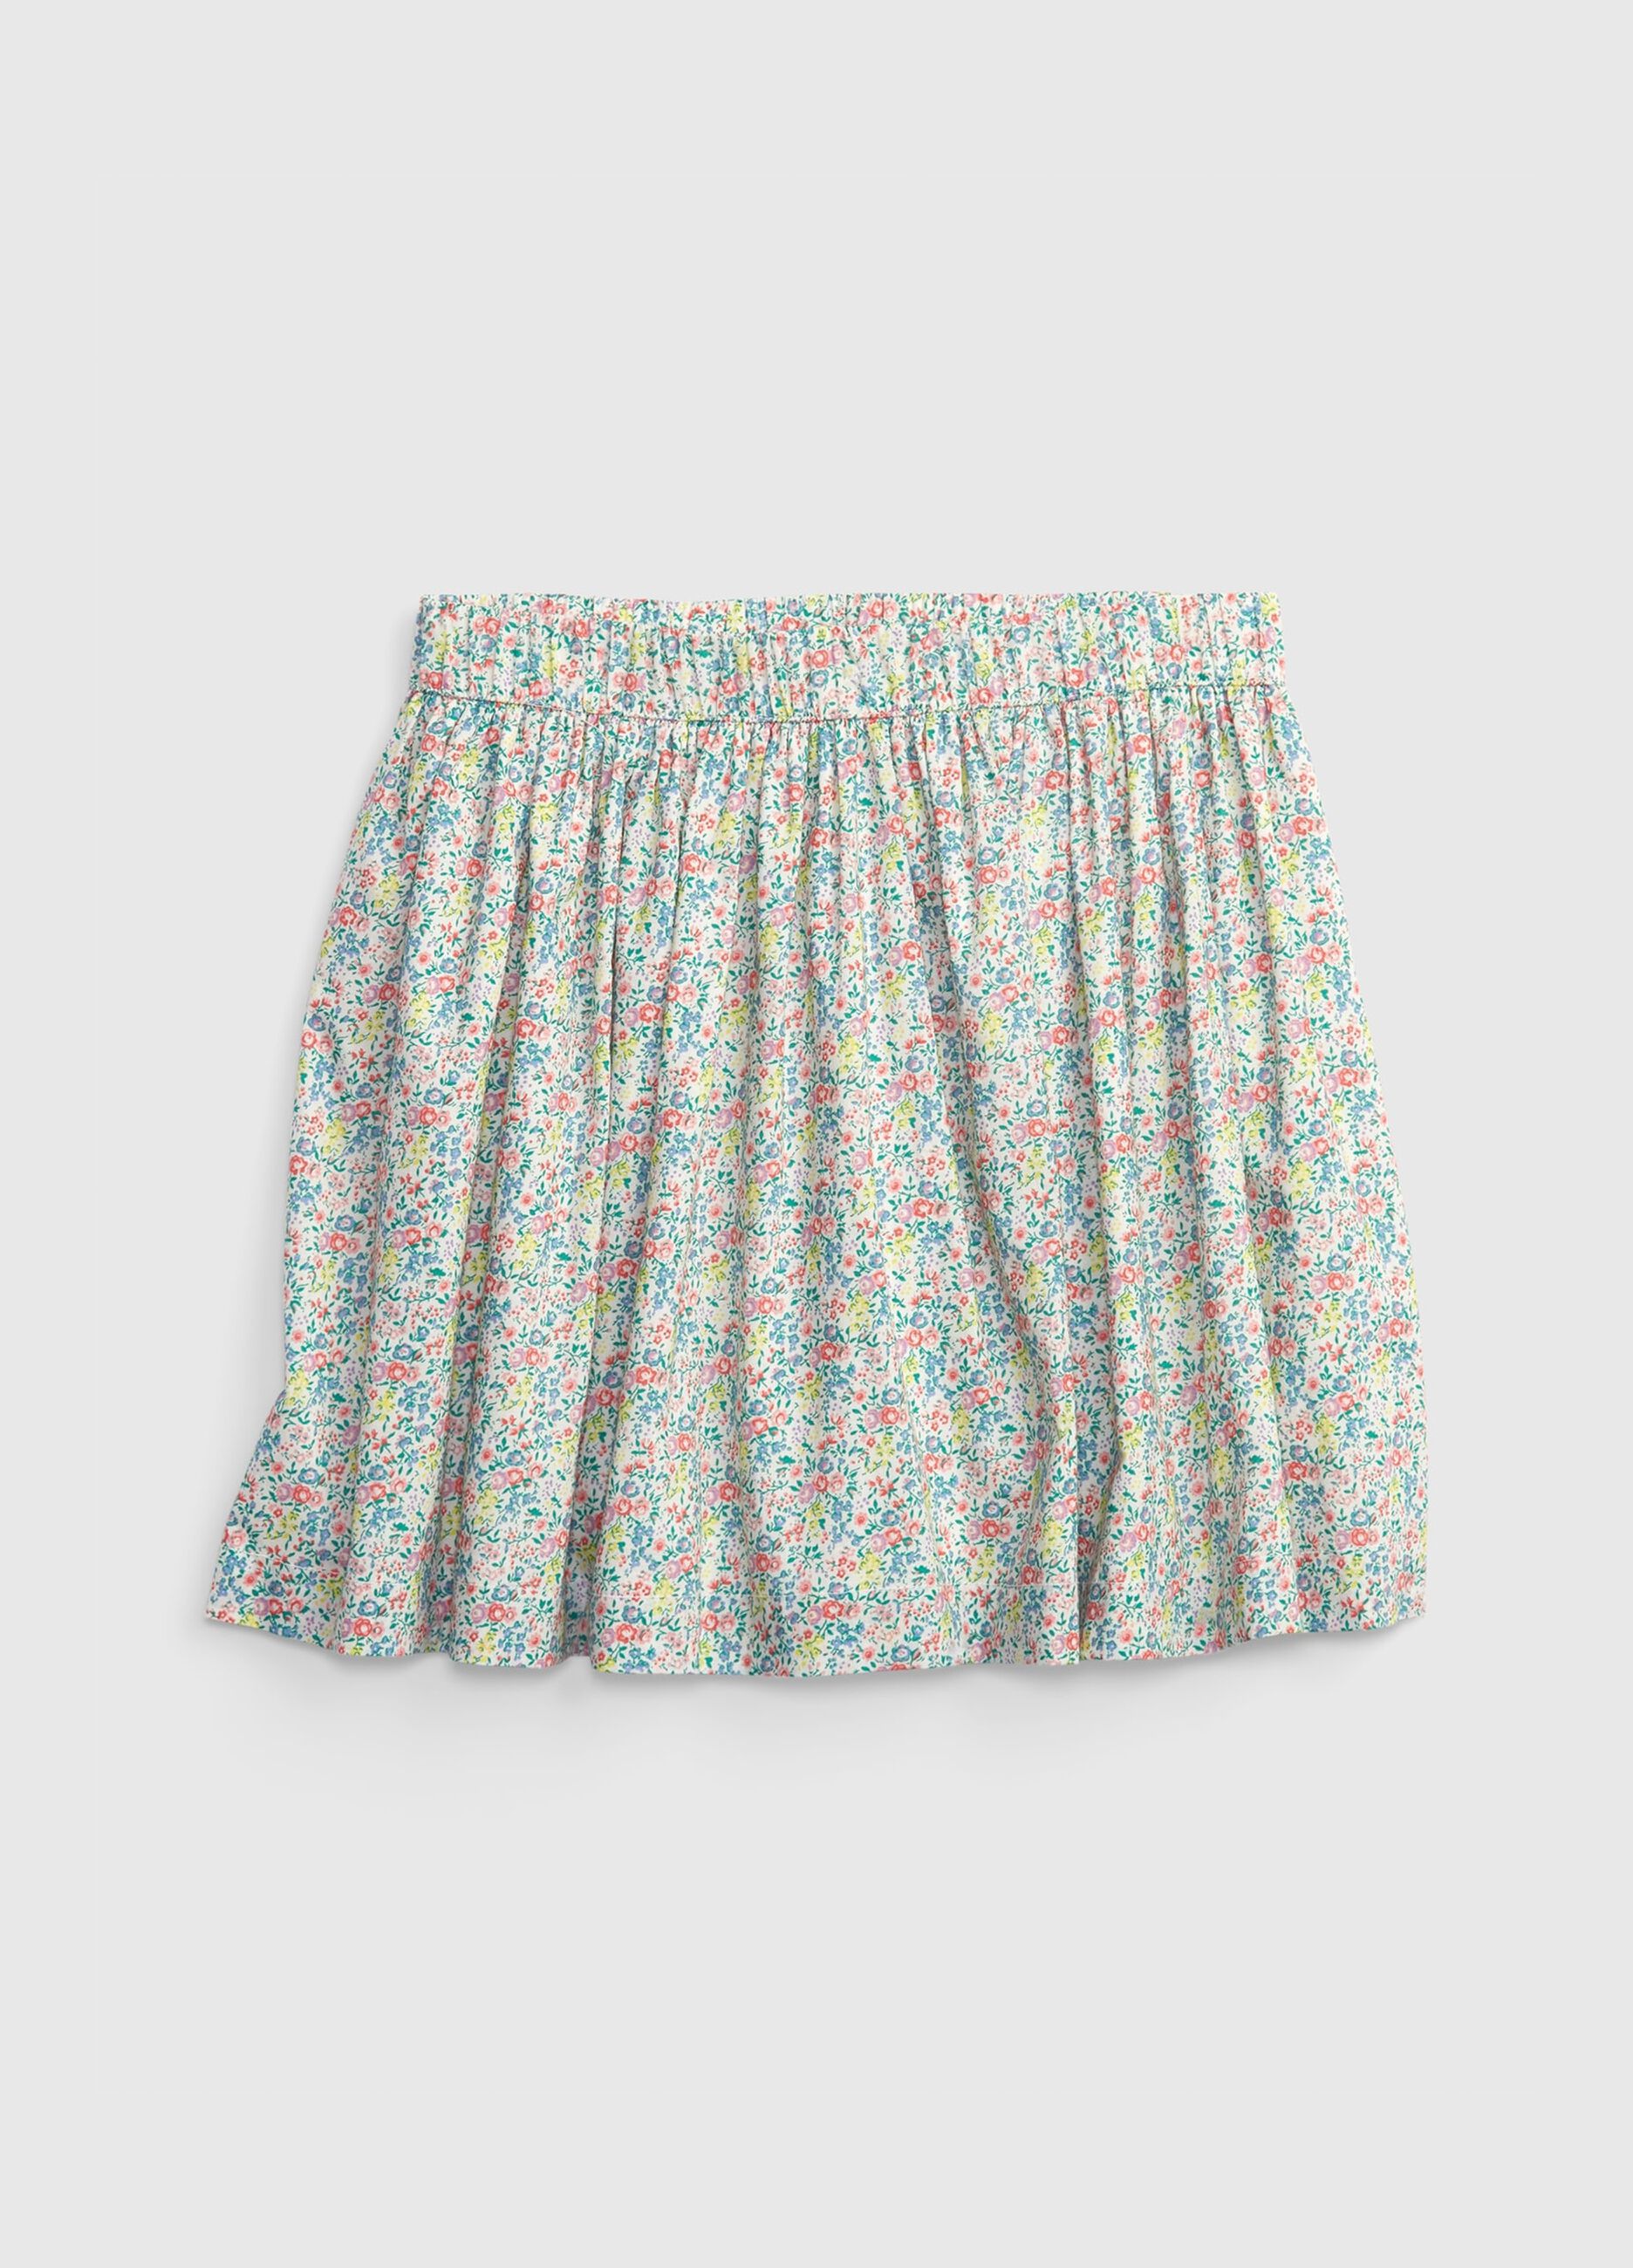 Miniskirt with small flowers print